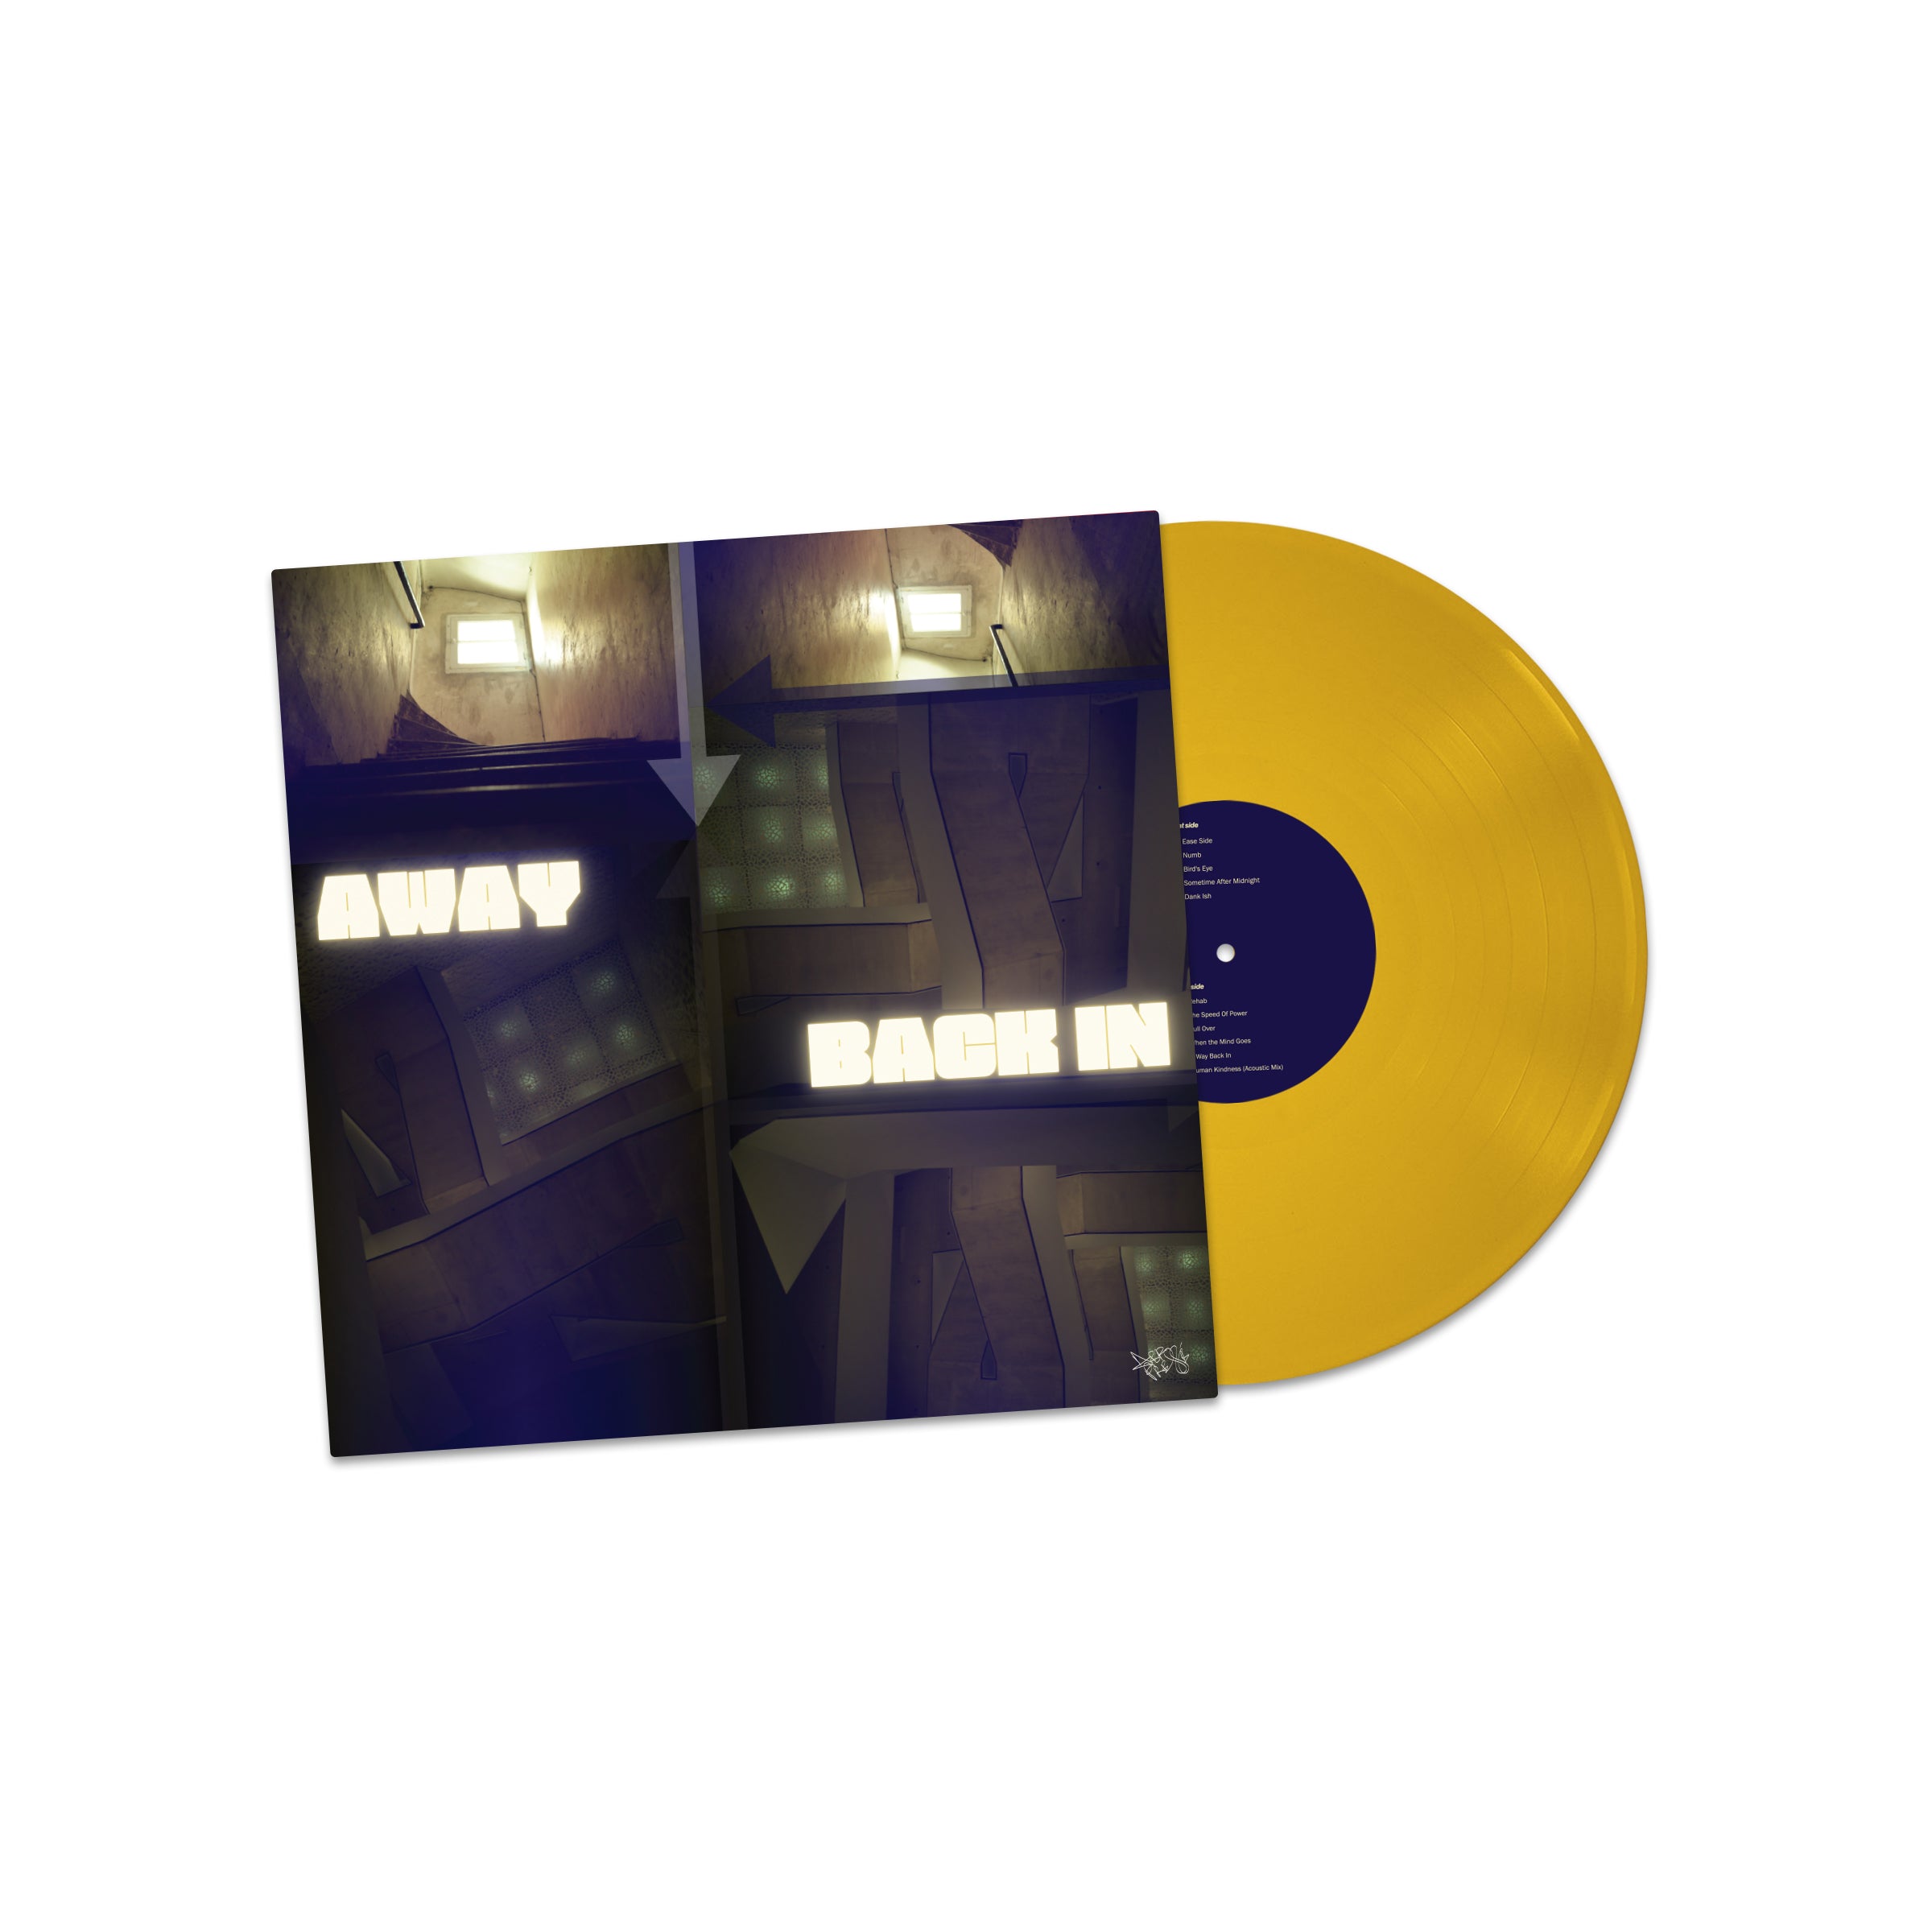 Raw Poetic - Away Back In: Limited Yellow Vinyl LP